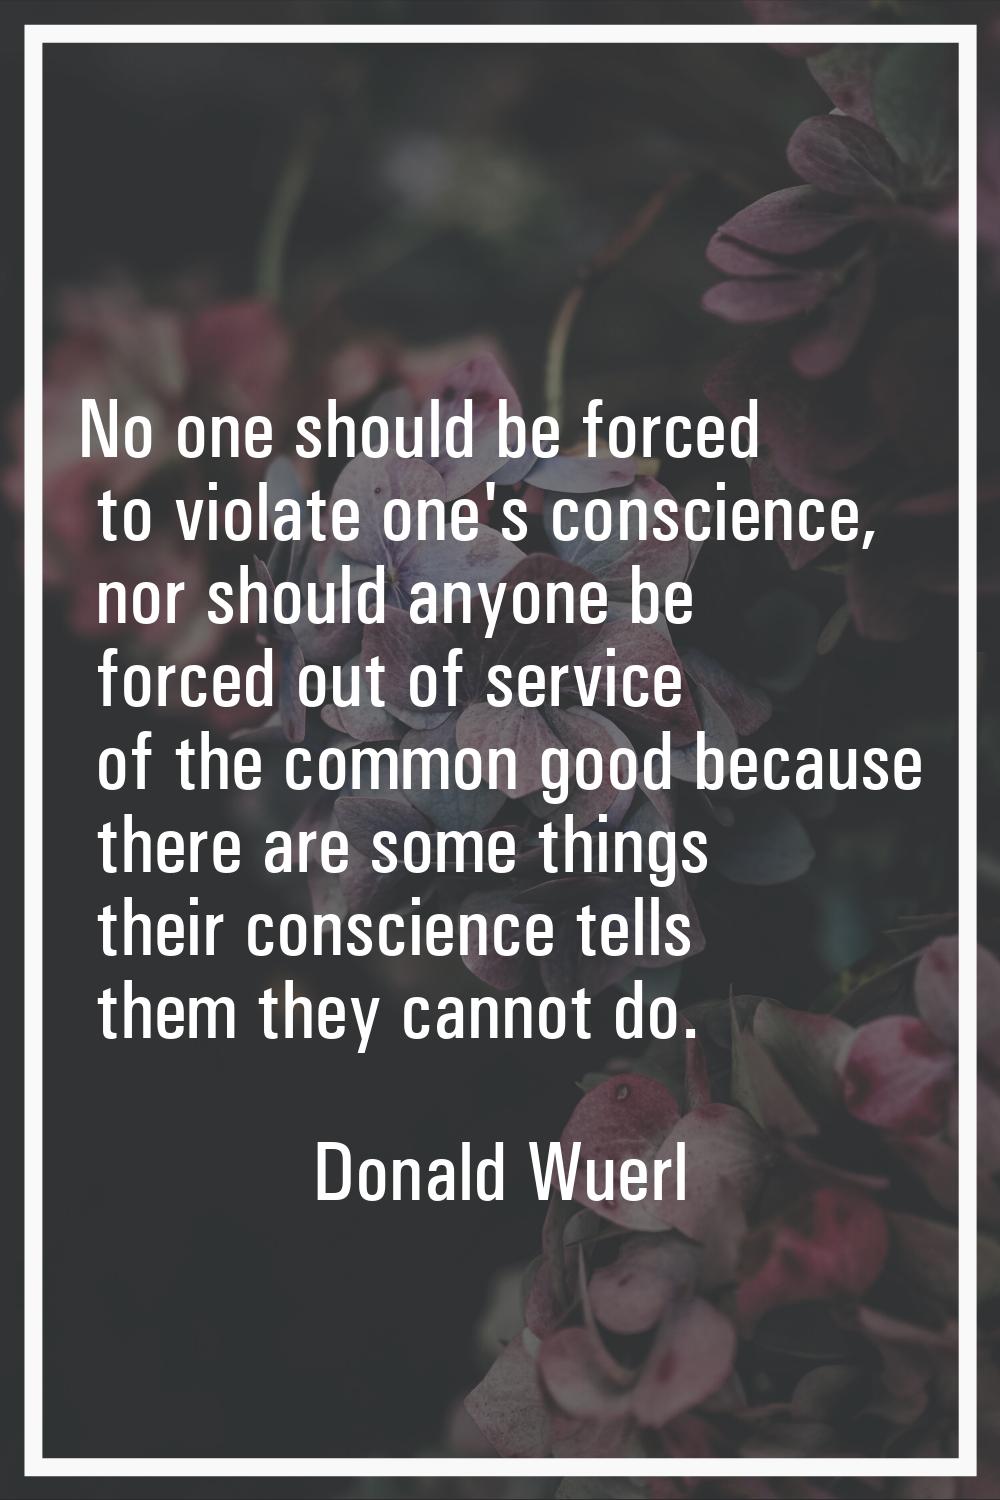 No one should be forced to violate one's conscience, nor should anyone be forced out of service of 